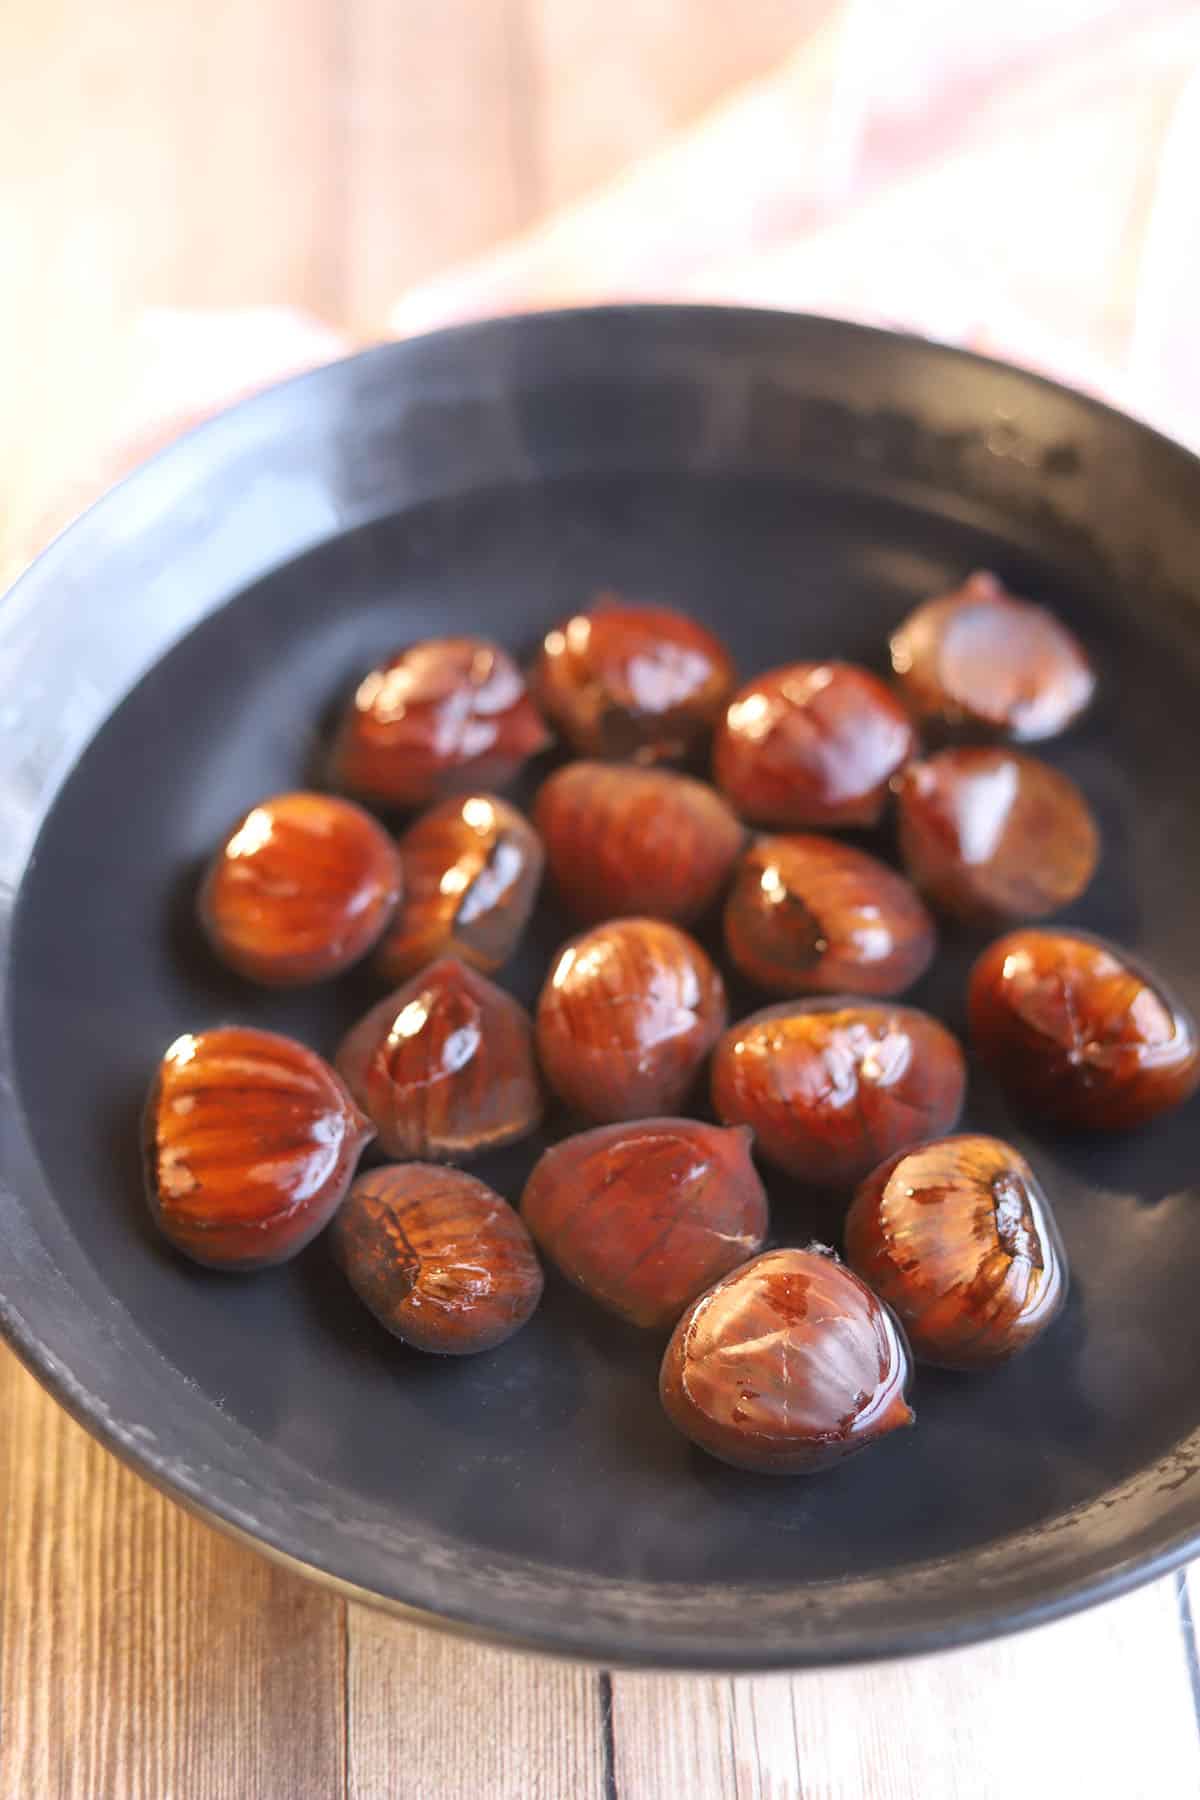 Chestnuts soaking in a bowl of water.